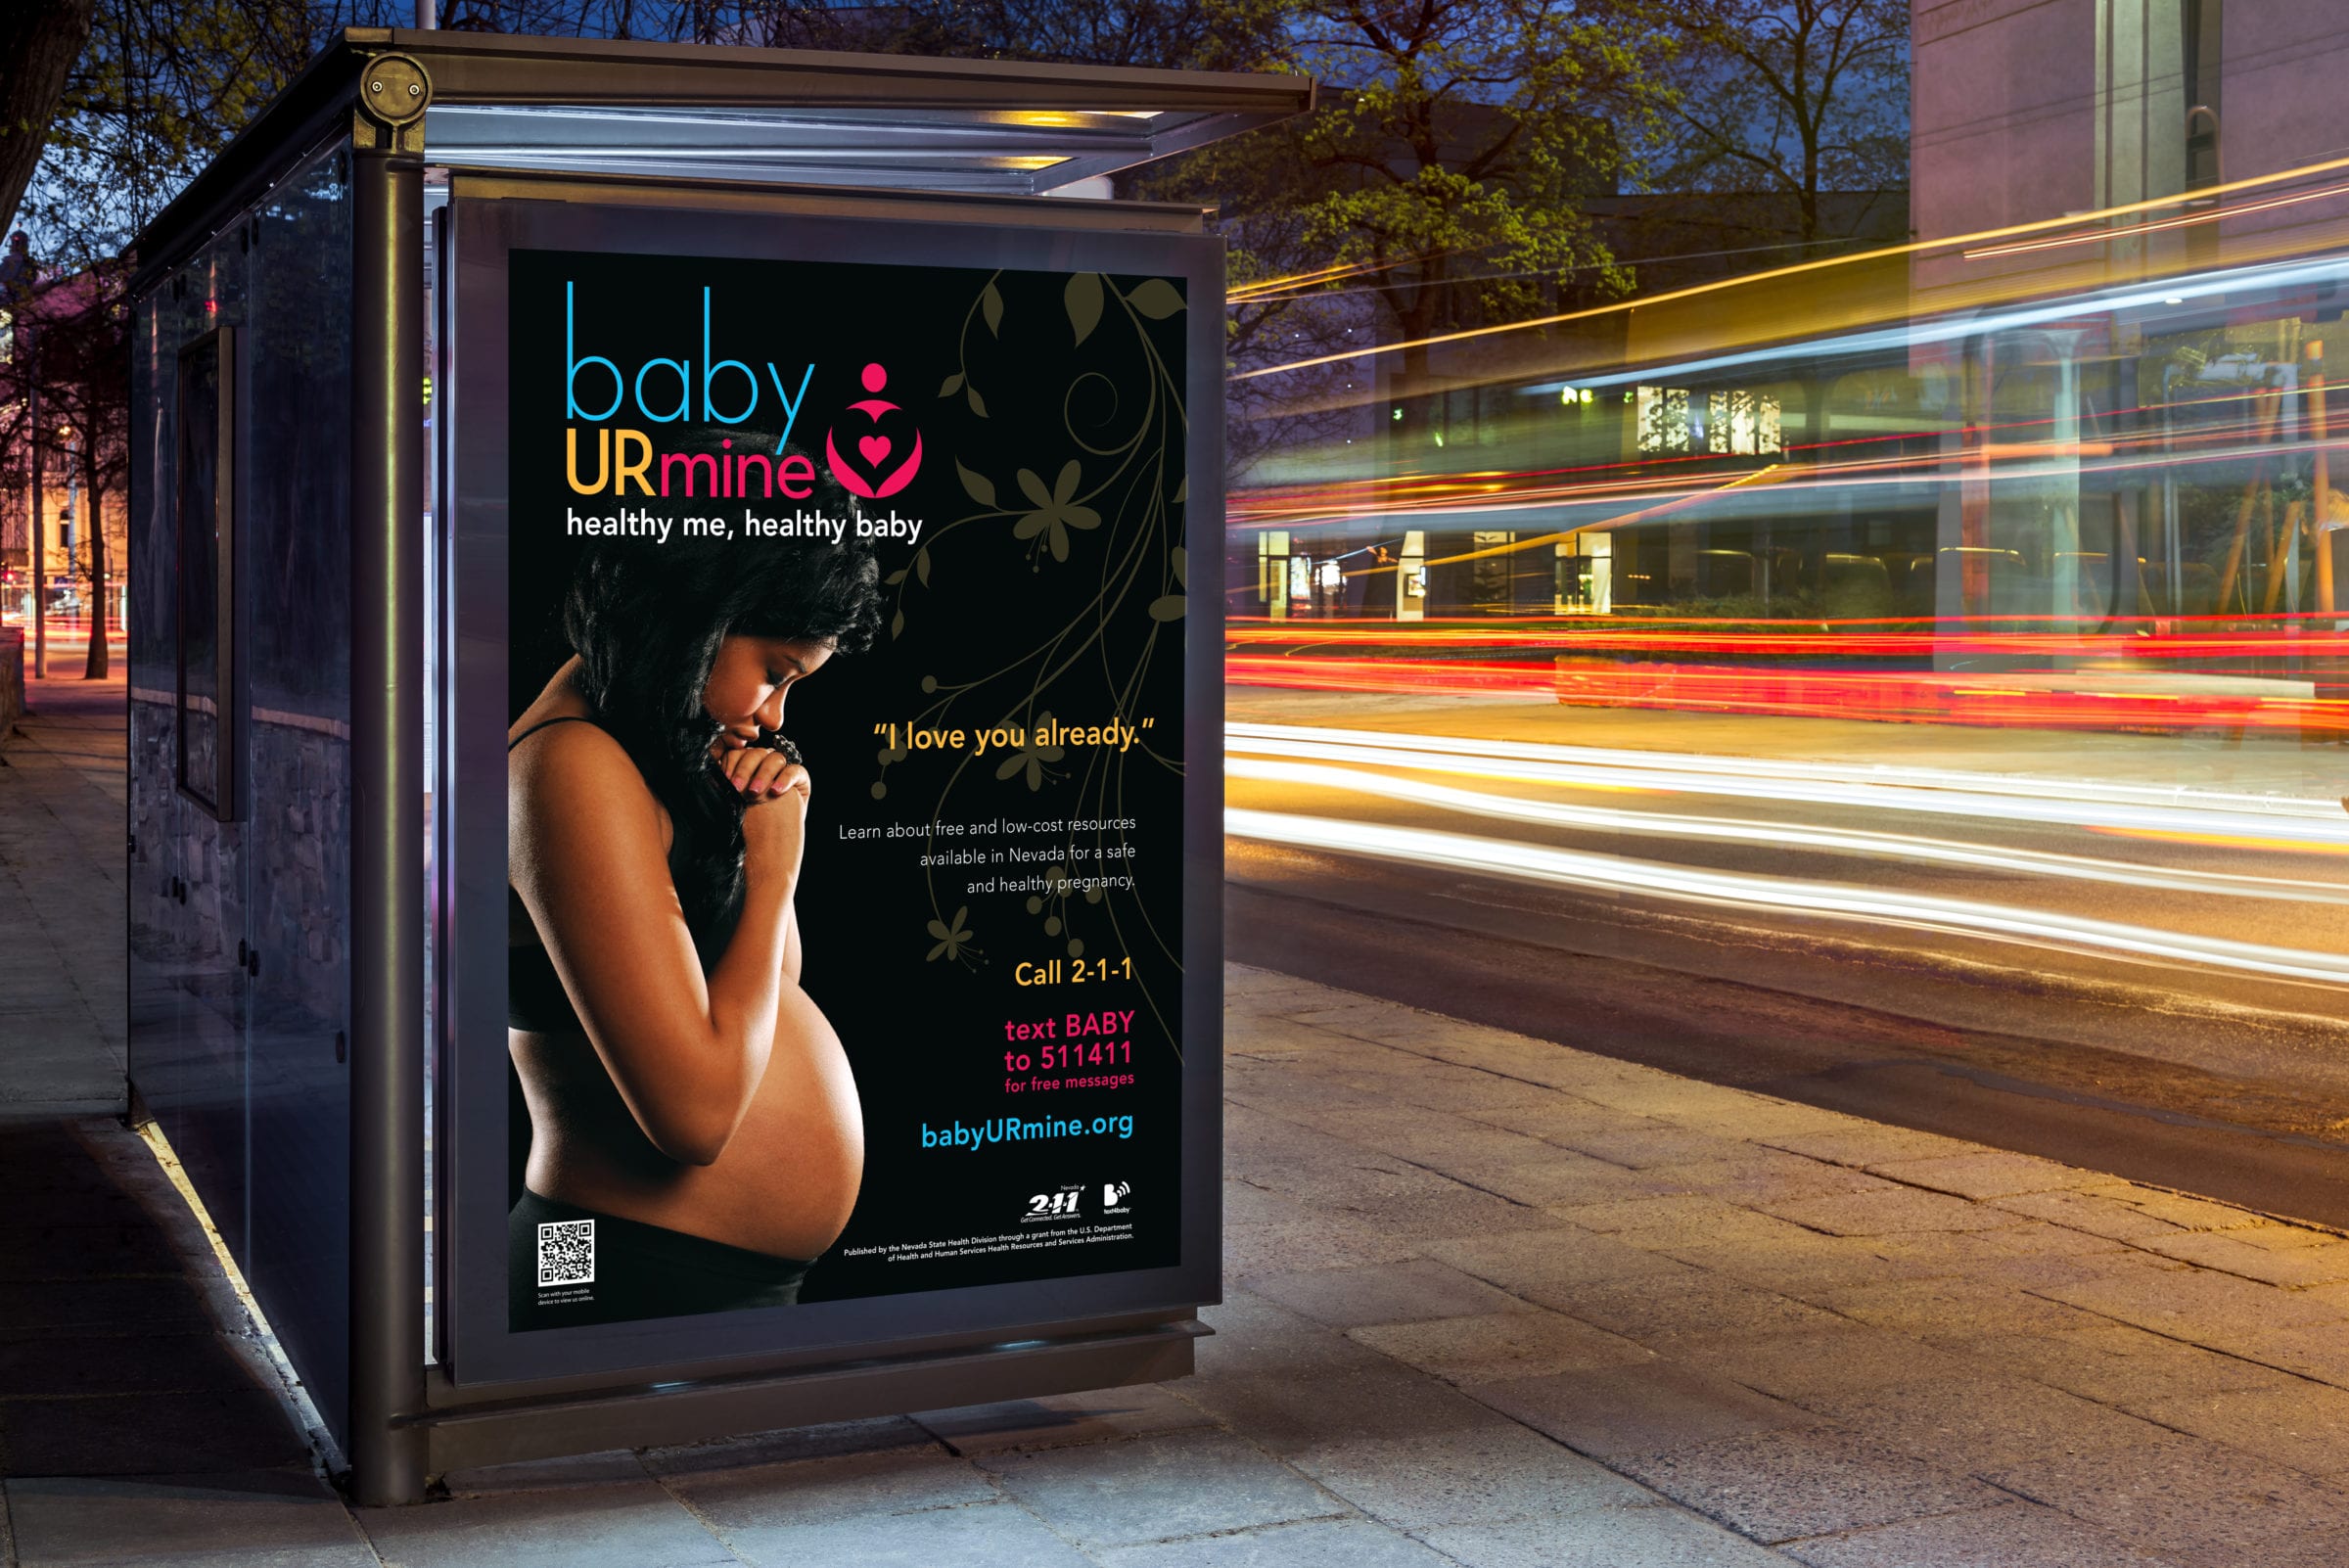 A bus-stop billboard with the "Baby Ur Mine" campaign, pictured with a pregnant woman.